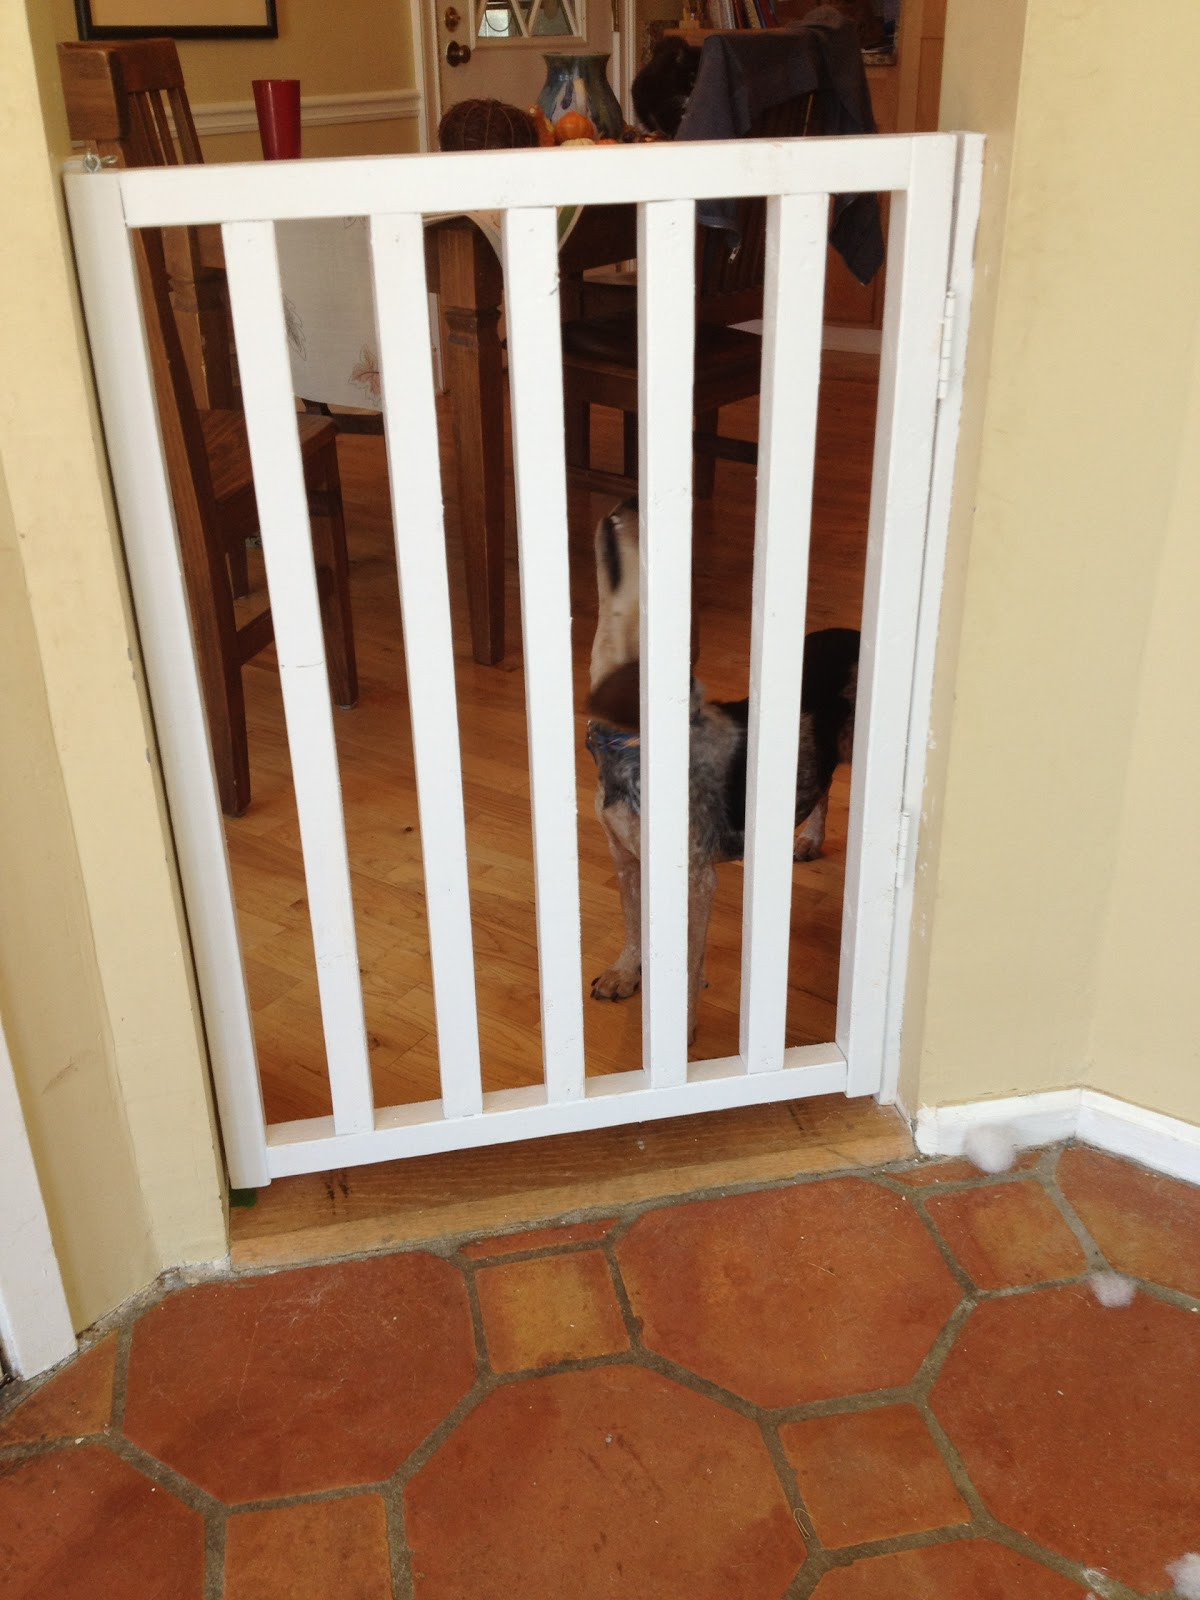 DIY Dog Gates
 Boxy Colonial Weekend project 2 revealed DIY wooden